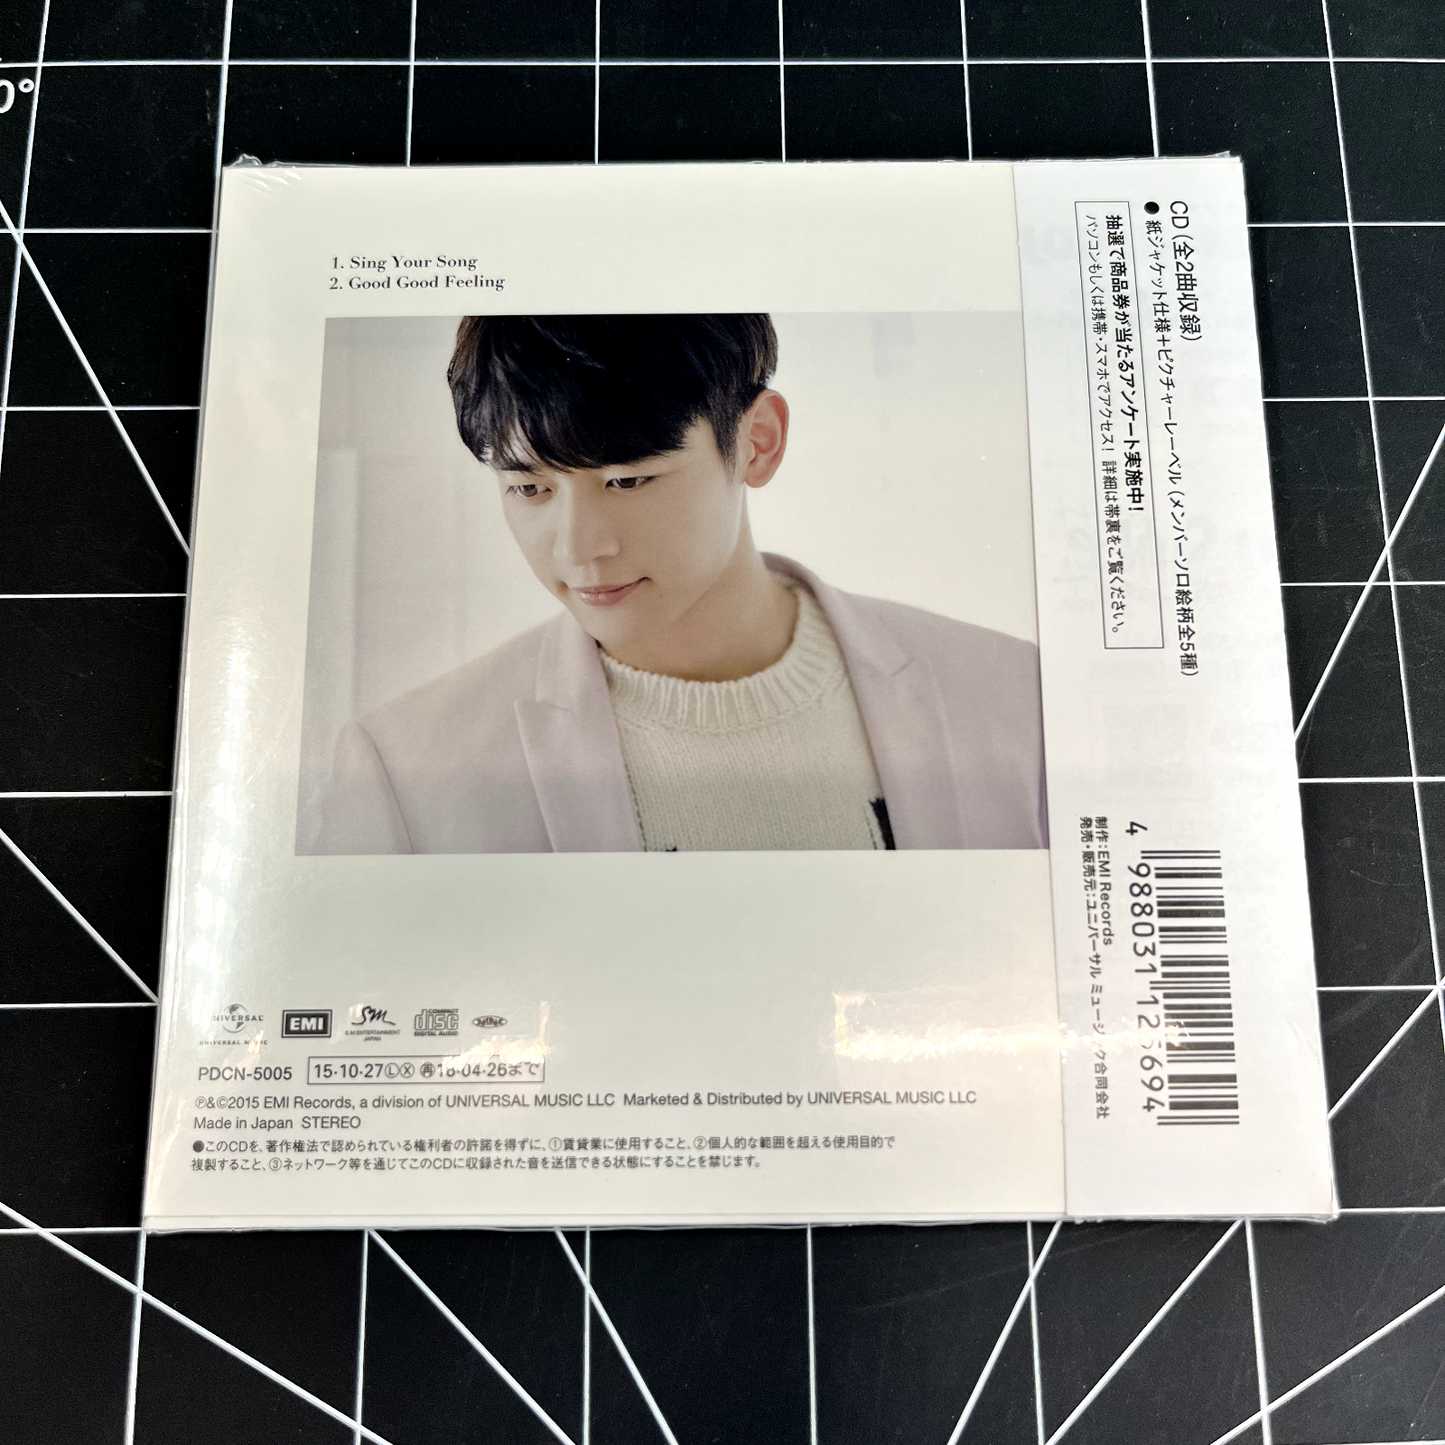 SHINee Sing Your Song Japan CD (FC Limited Edition) - Minho Version